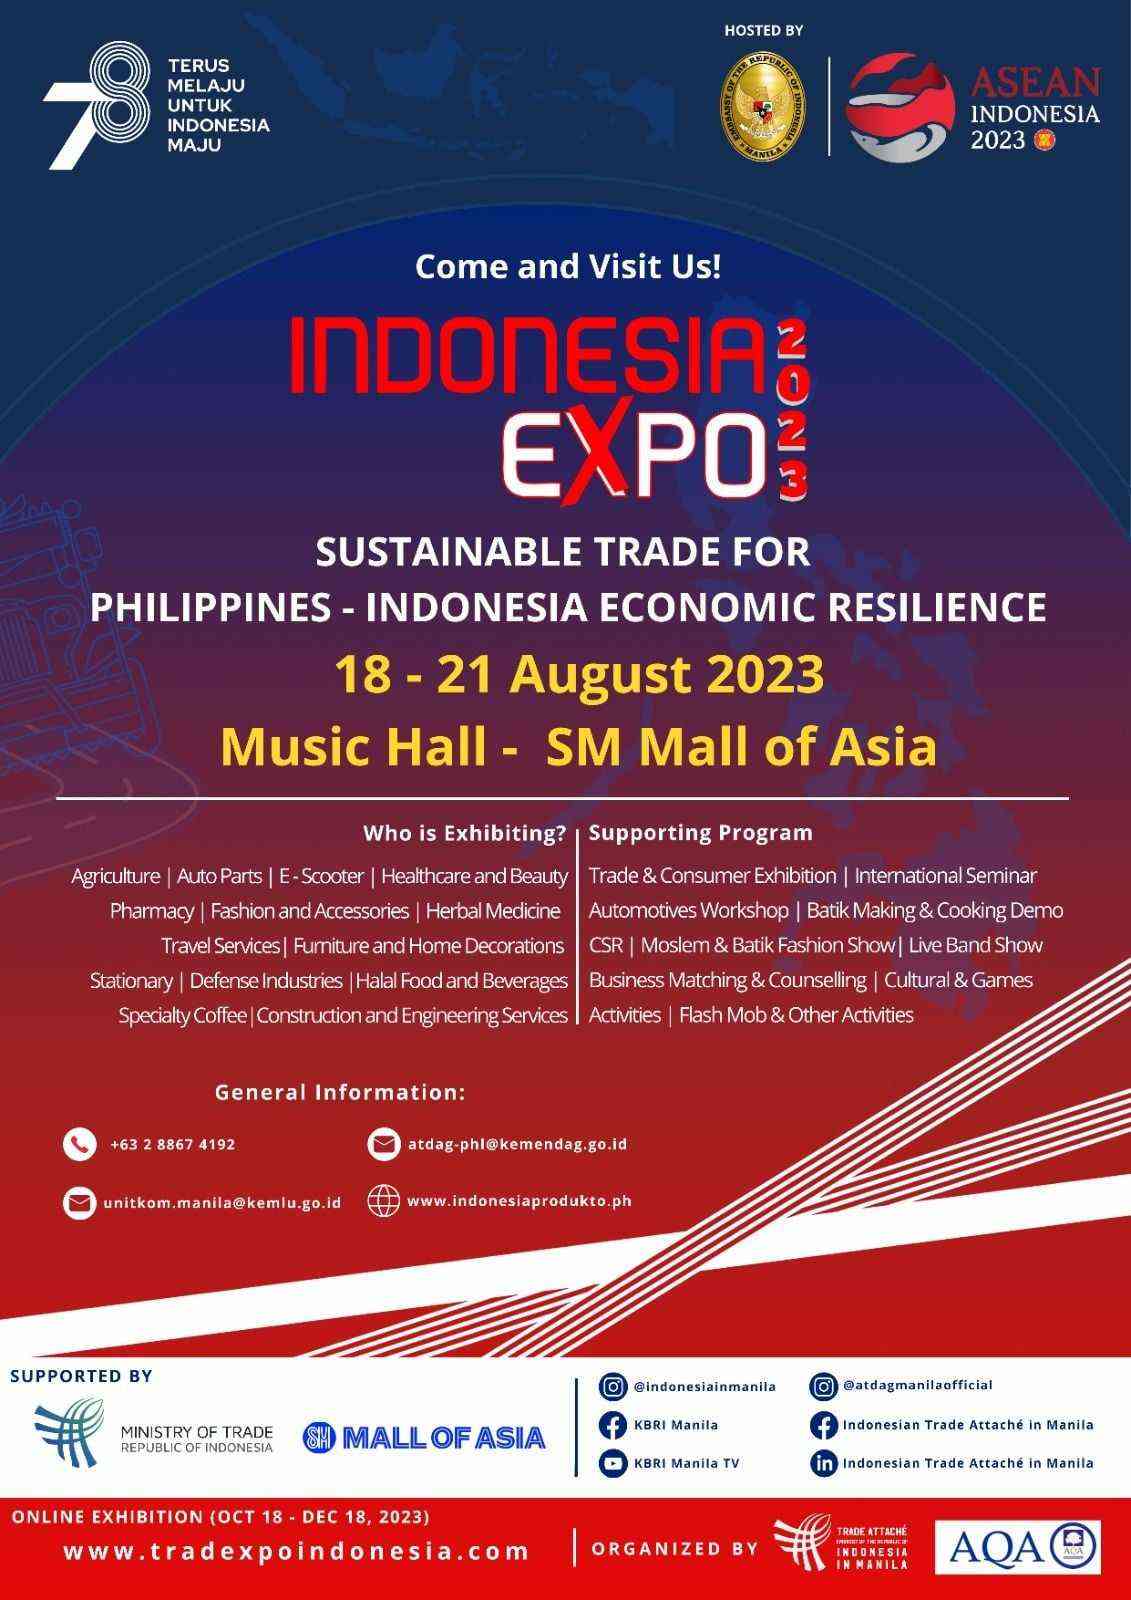 Embassy of Indonesia in Manila presents "Indonesia Expo 2023:  A Celebration of Sustainable Trade and Economic Resilience